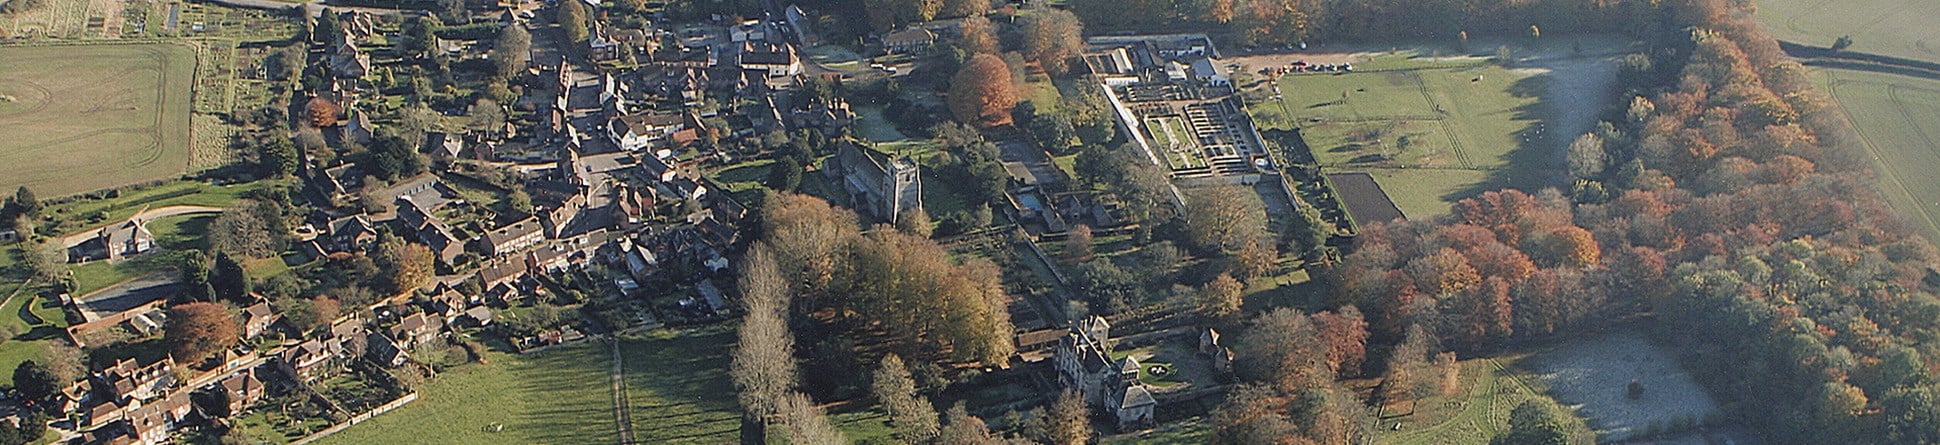 Colour aerial photo showing a village centre with a church, manor house and houses bordering a central market square